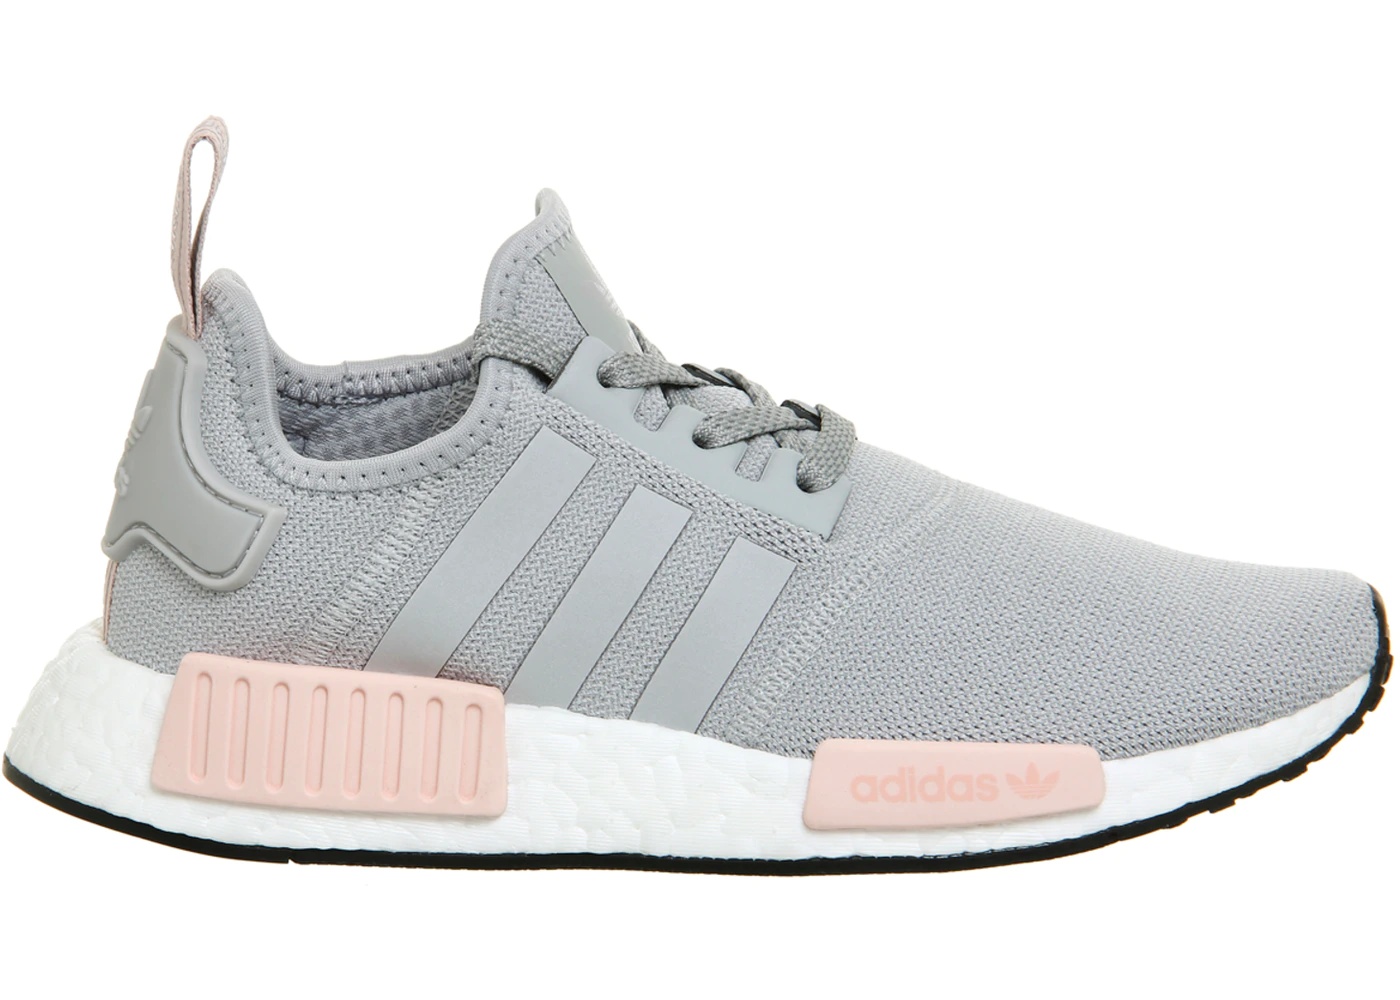 adidas NMD R1 Clear Onix Vapour Pink (W) - 1